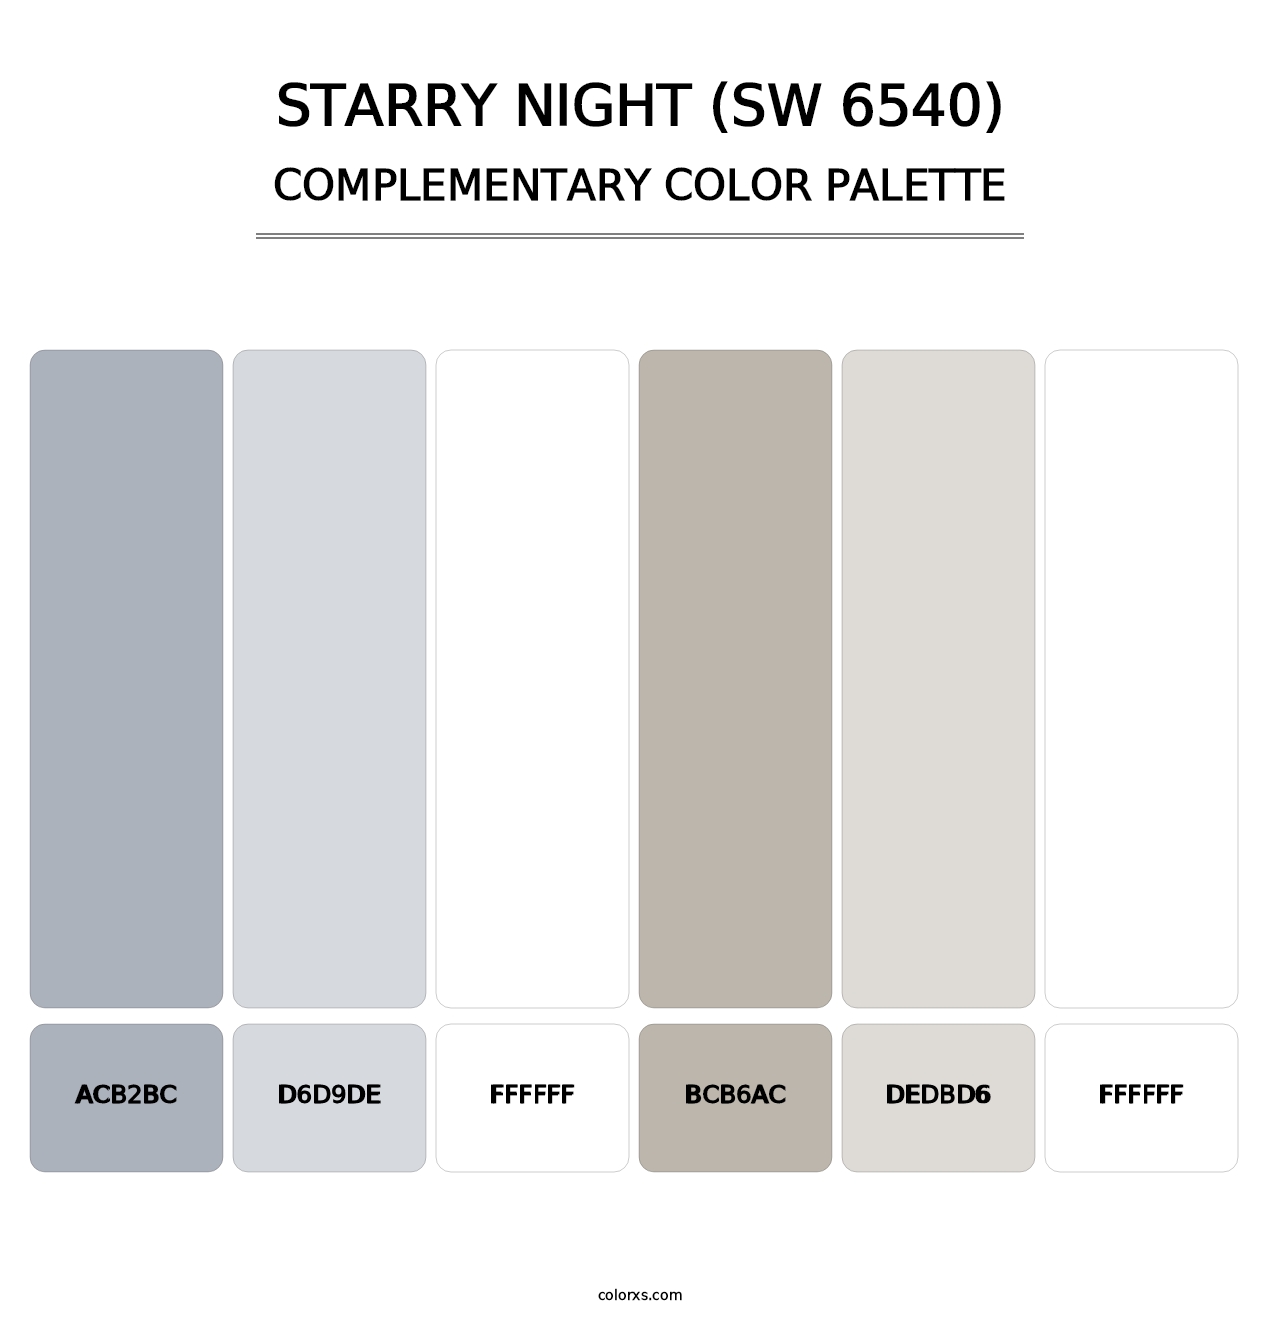 Starry Night (SW 6540) - Complementary Color Palette